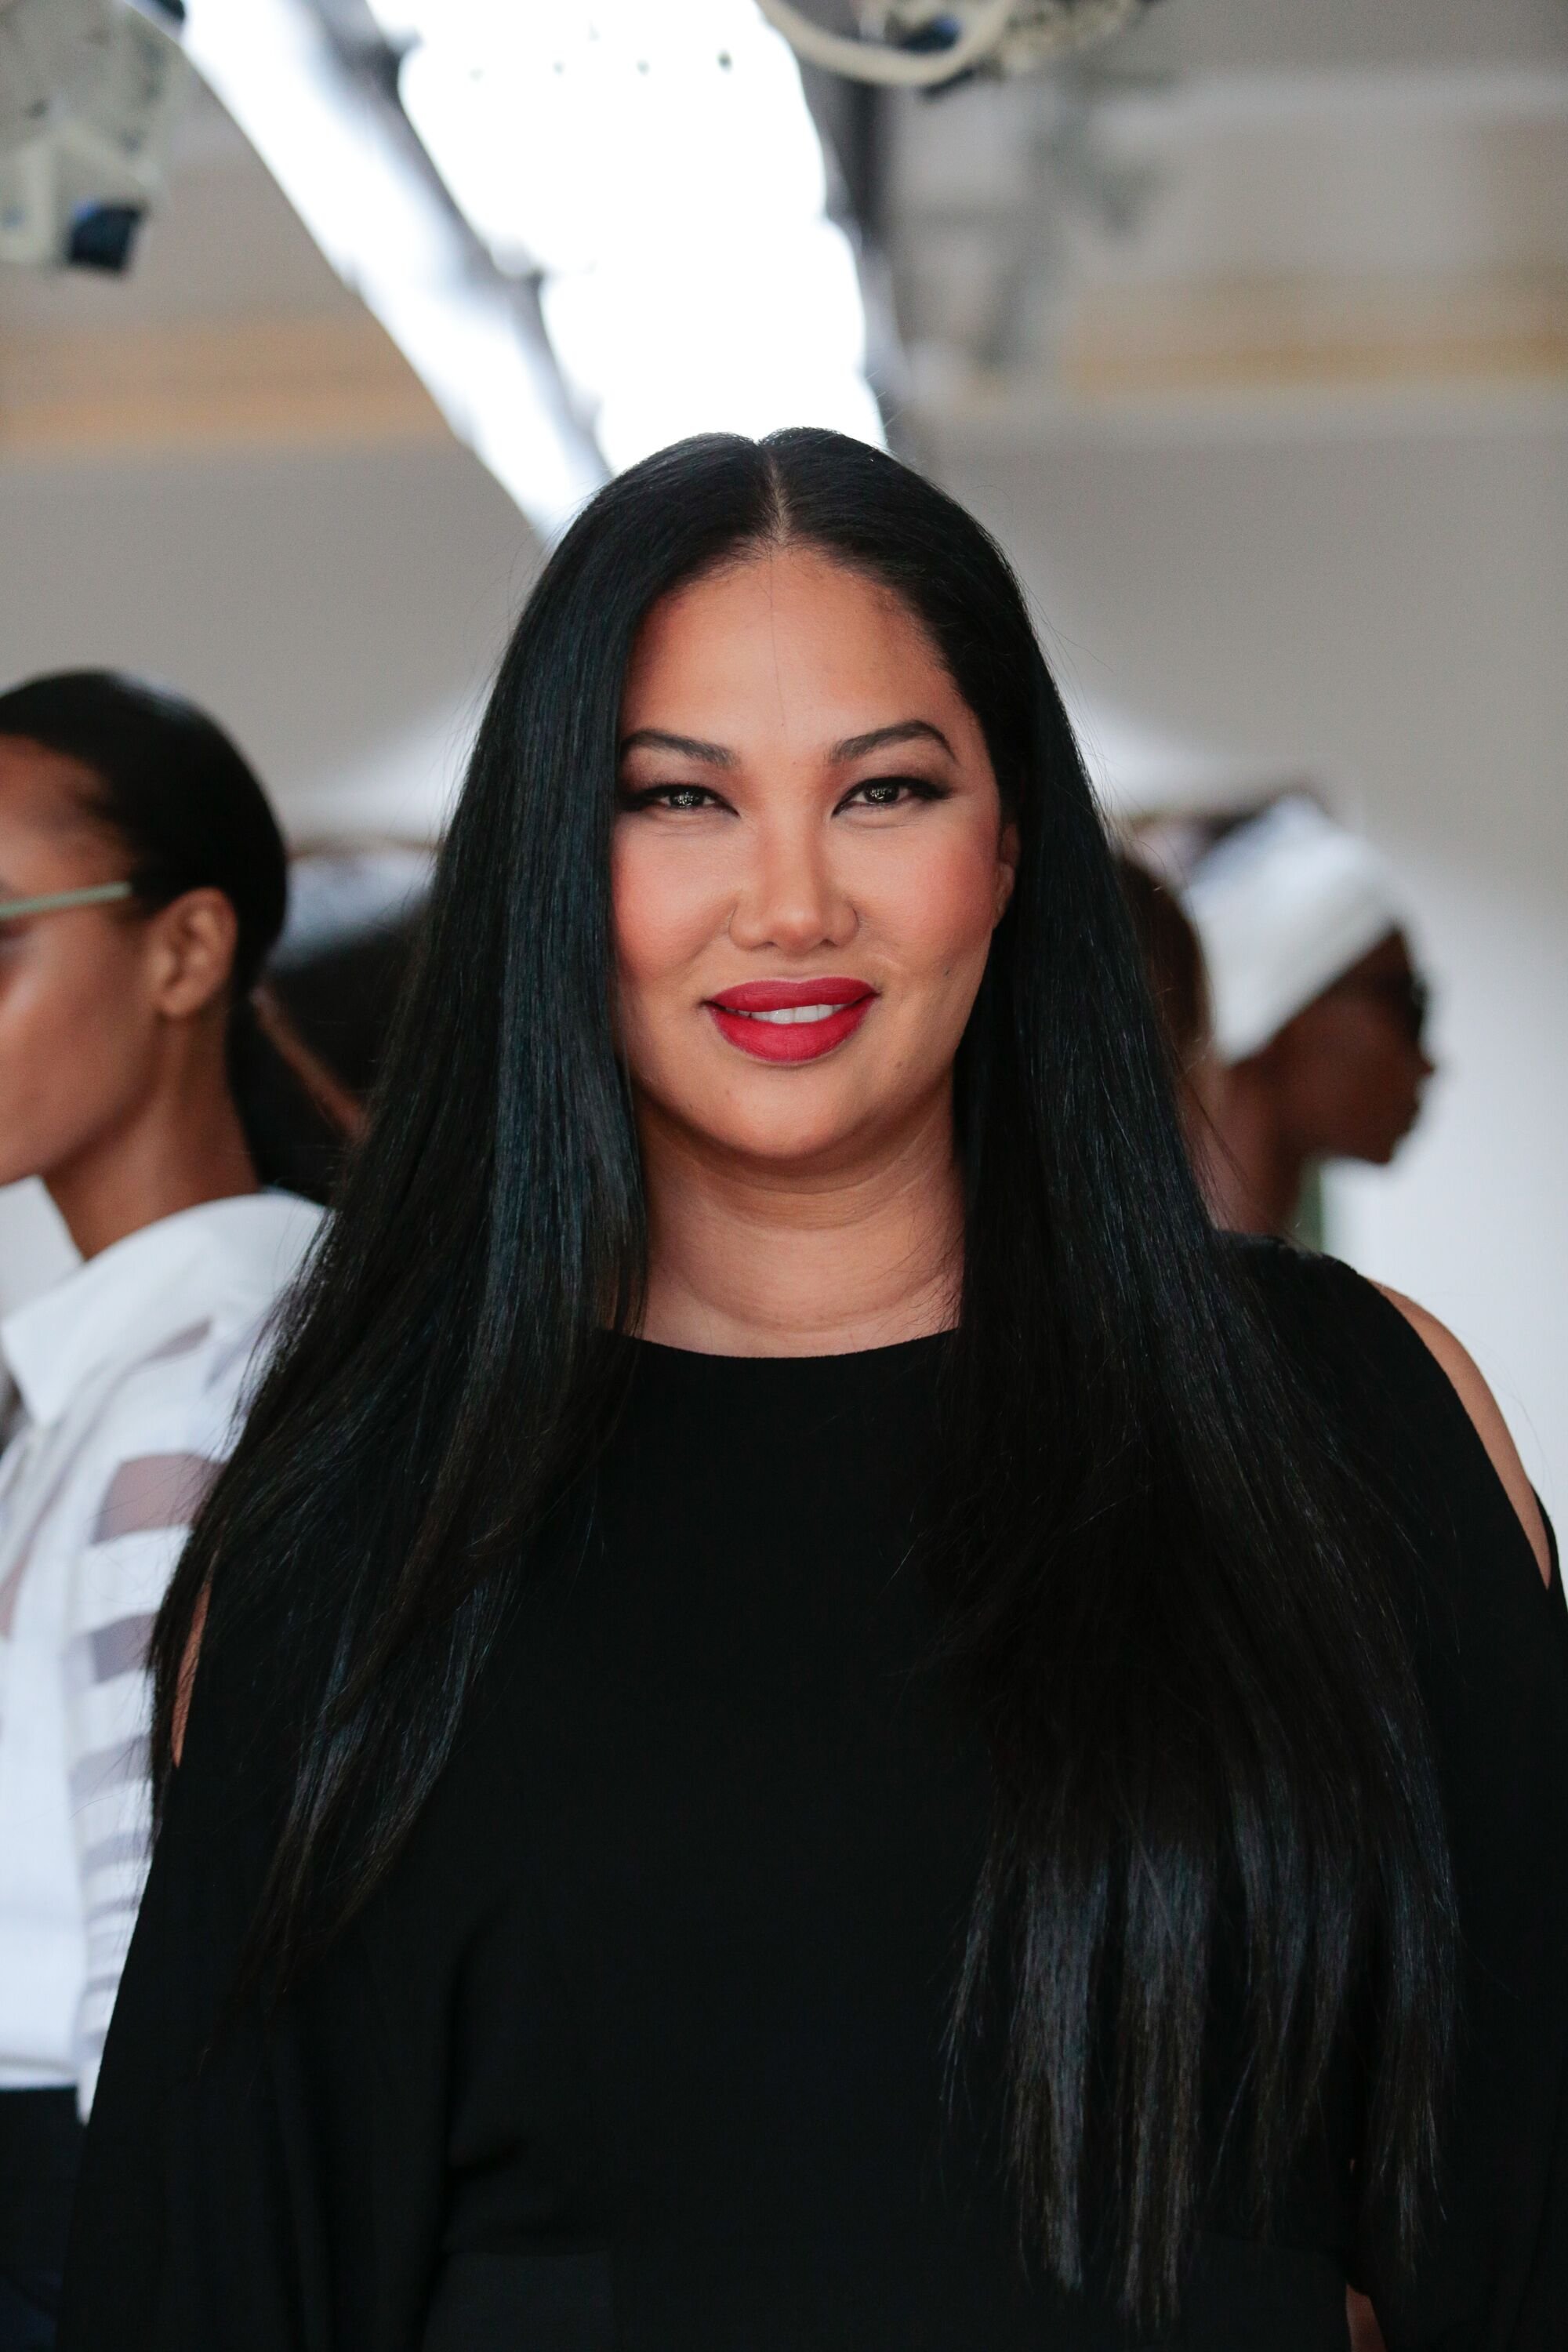 Kimora Lee Simmons backstage at the December 2019 relaunch of Baby Phat/ Source: Getty Images